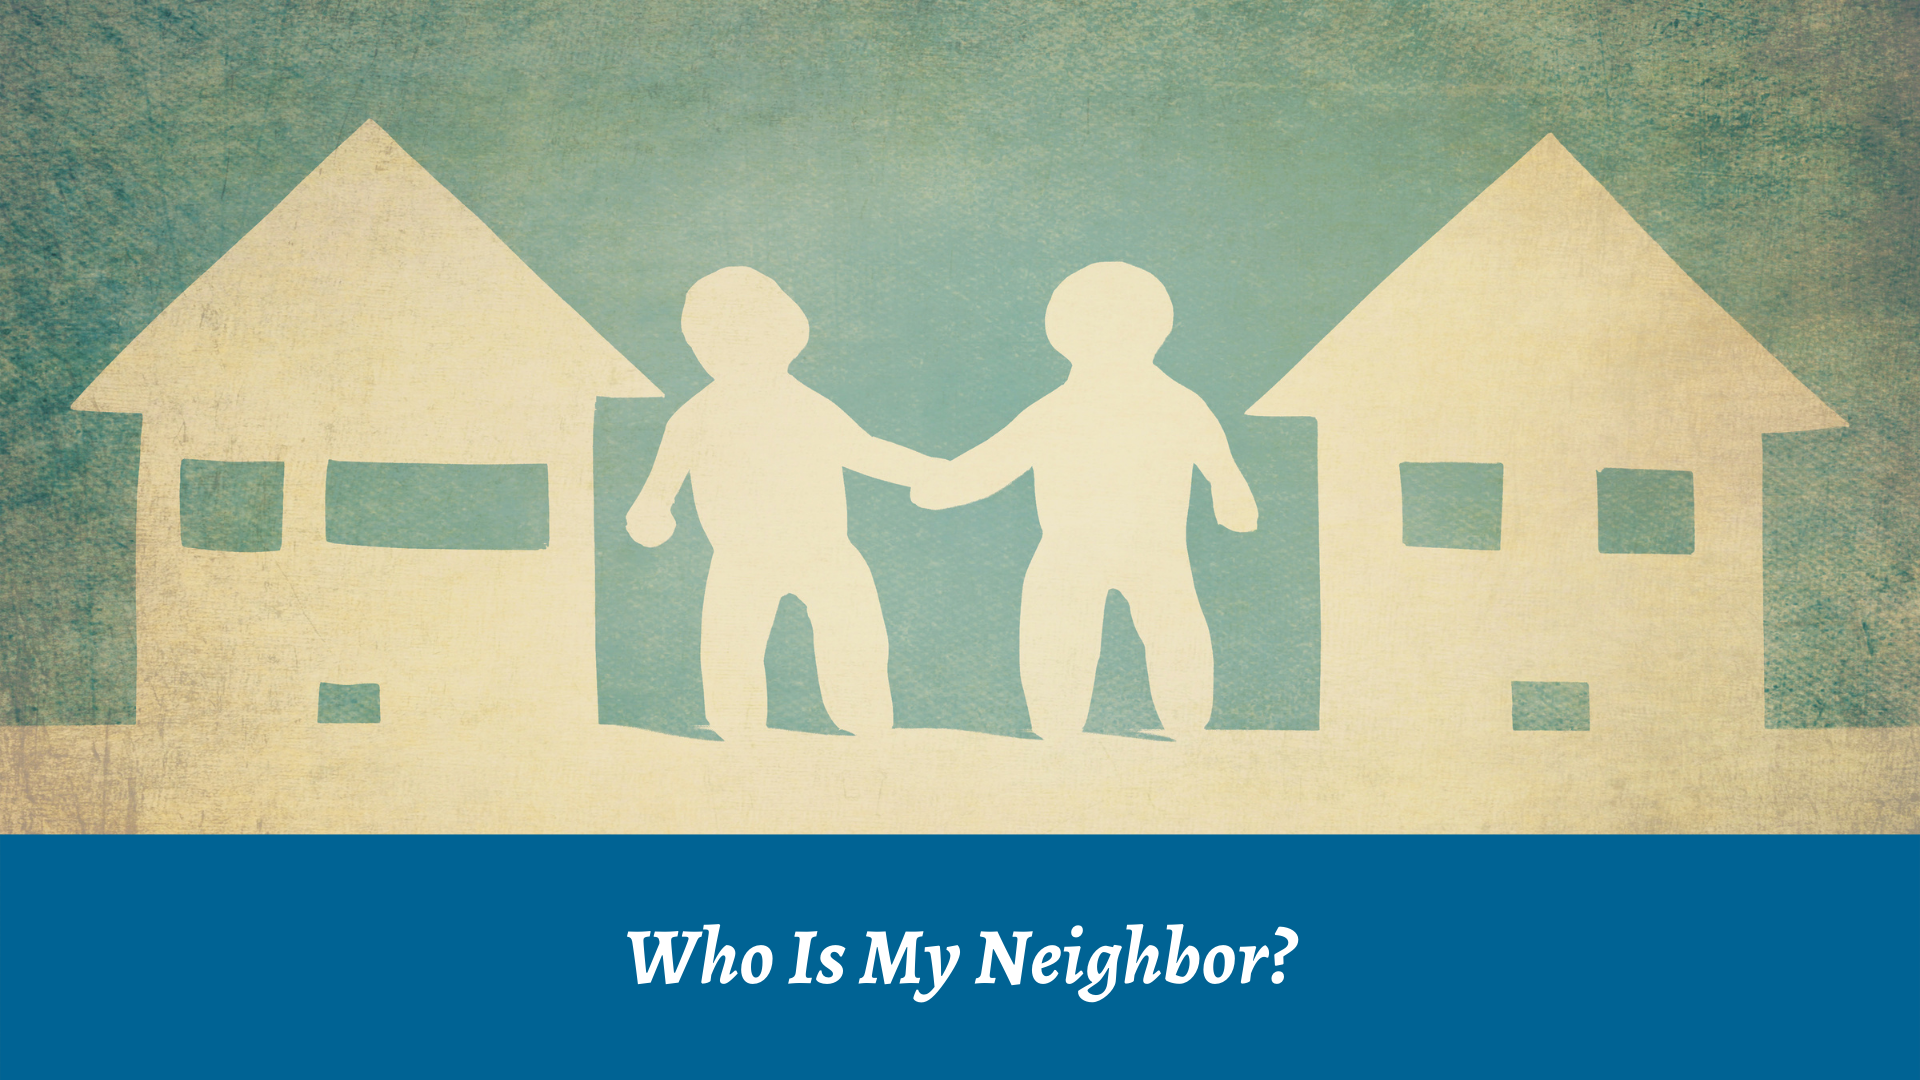 The power of knowing your neighbors